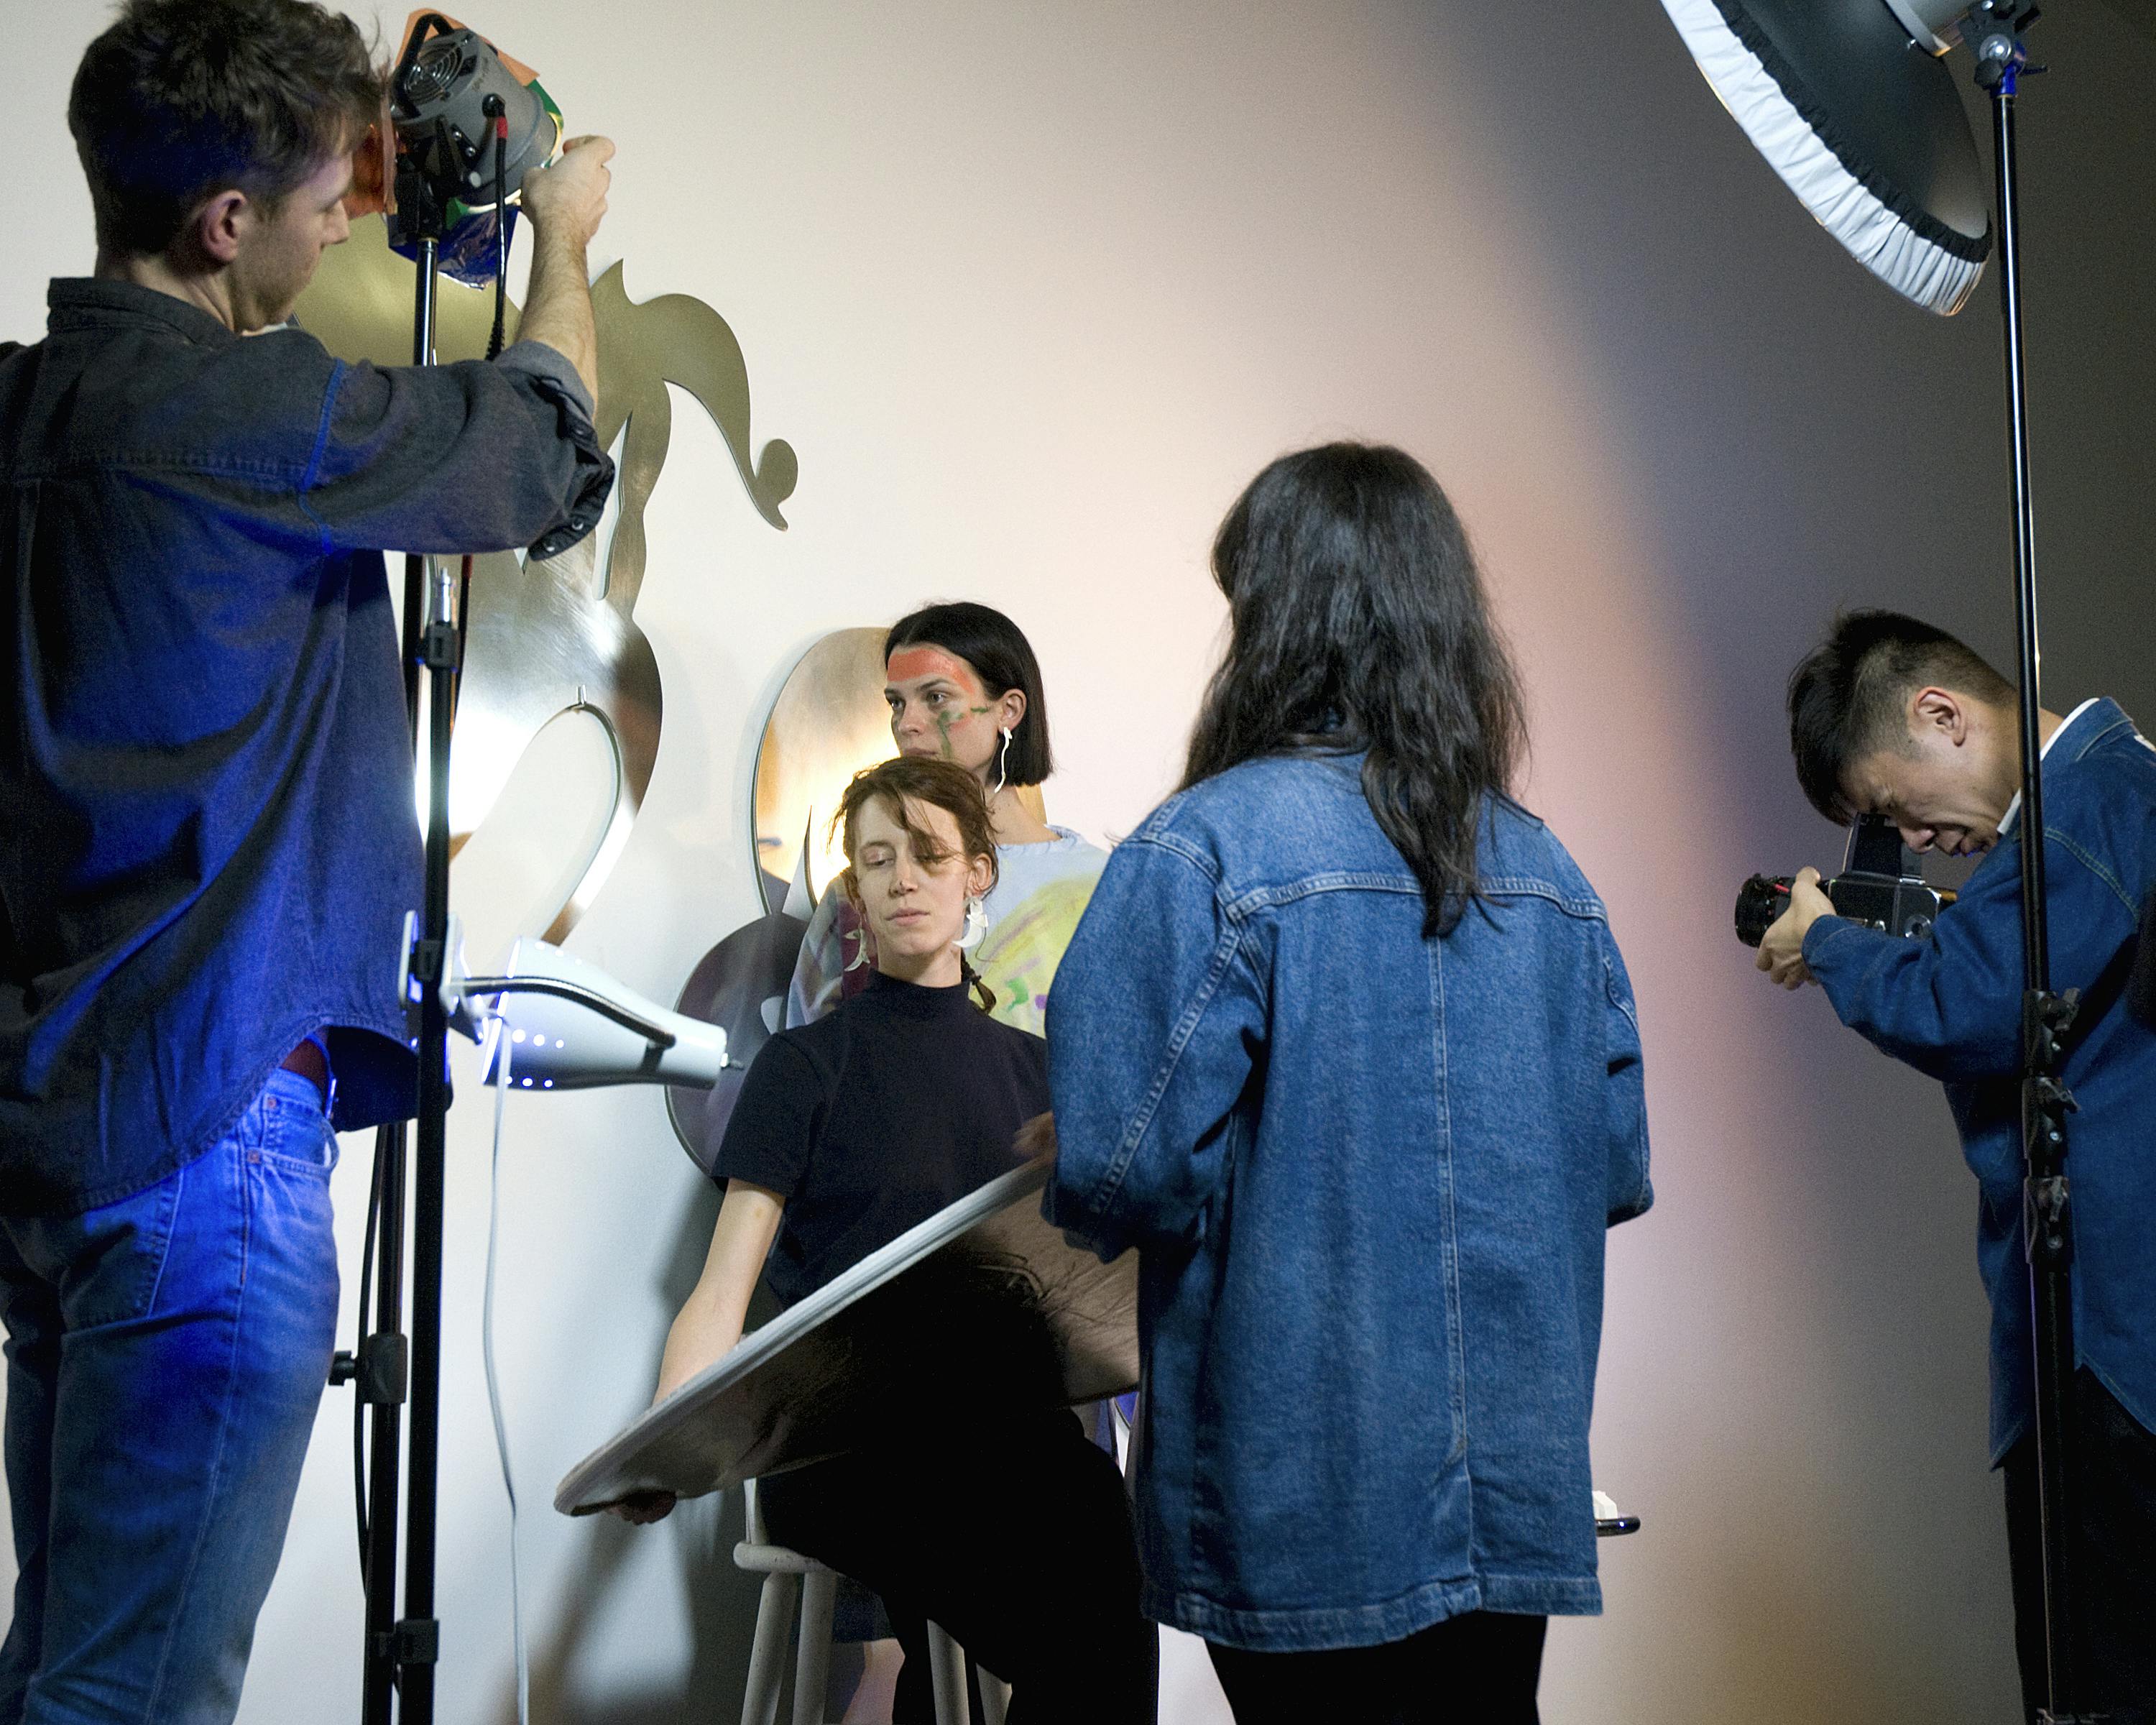 This is a close-up view of a performance taking place inside the gallery space. A person  is adjusting the stage light and another is taking a photograph of a seated person in the middle.  